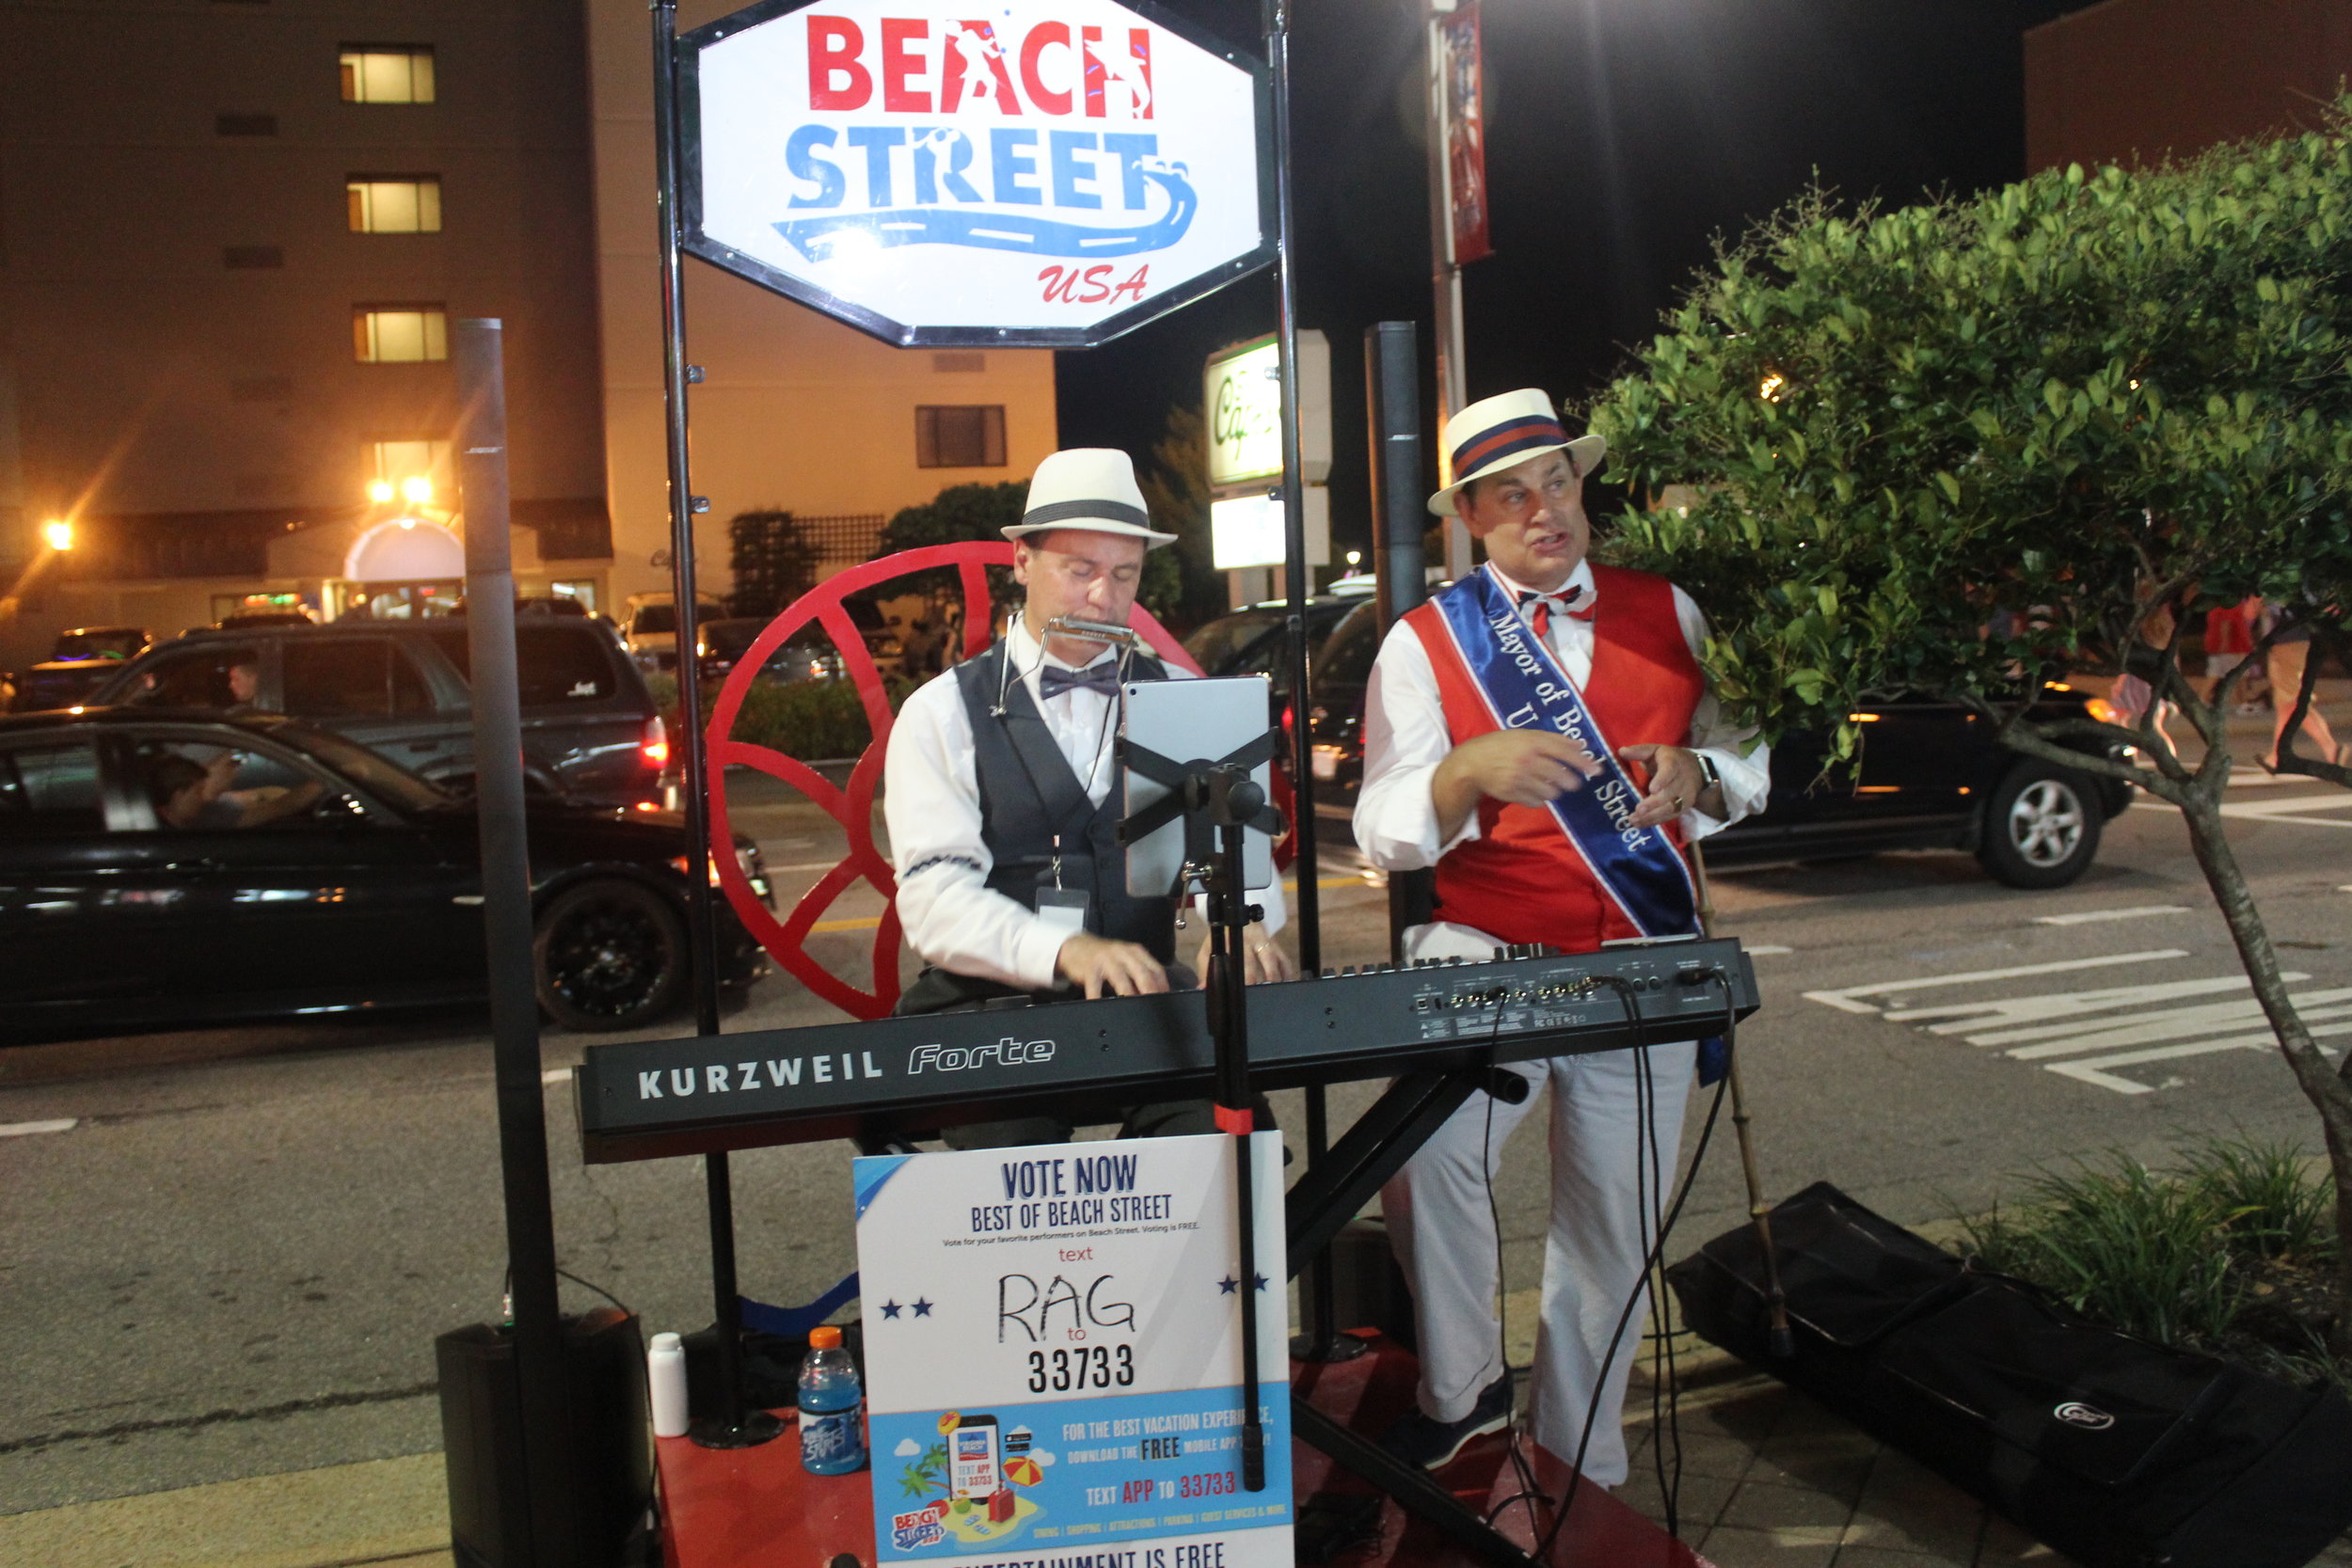  A piano/vocal duet with Alfred Garr, Mayor of Beachstreet USA, August 2016 